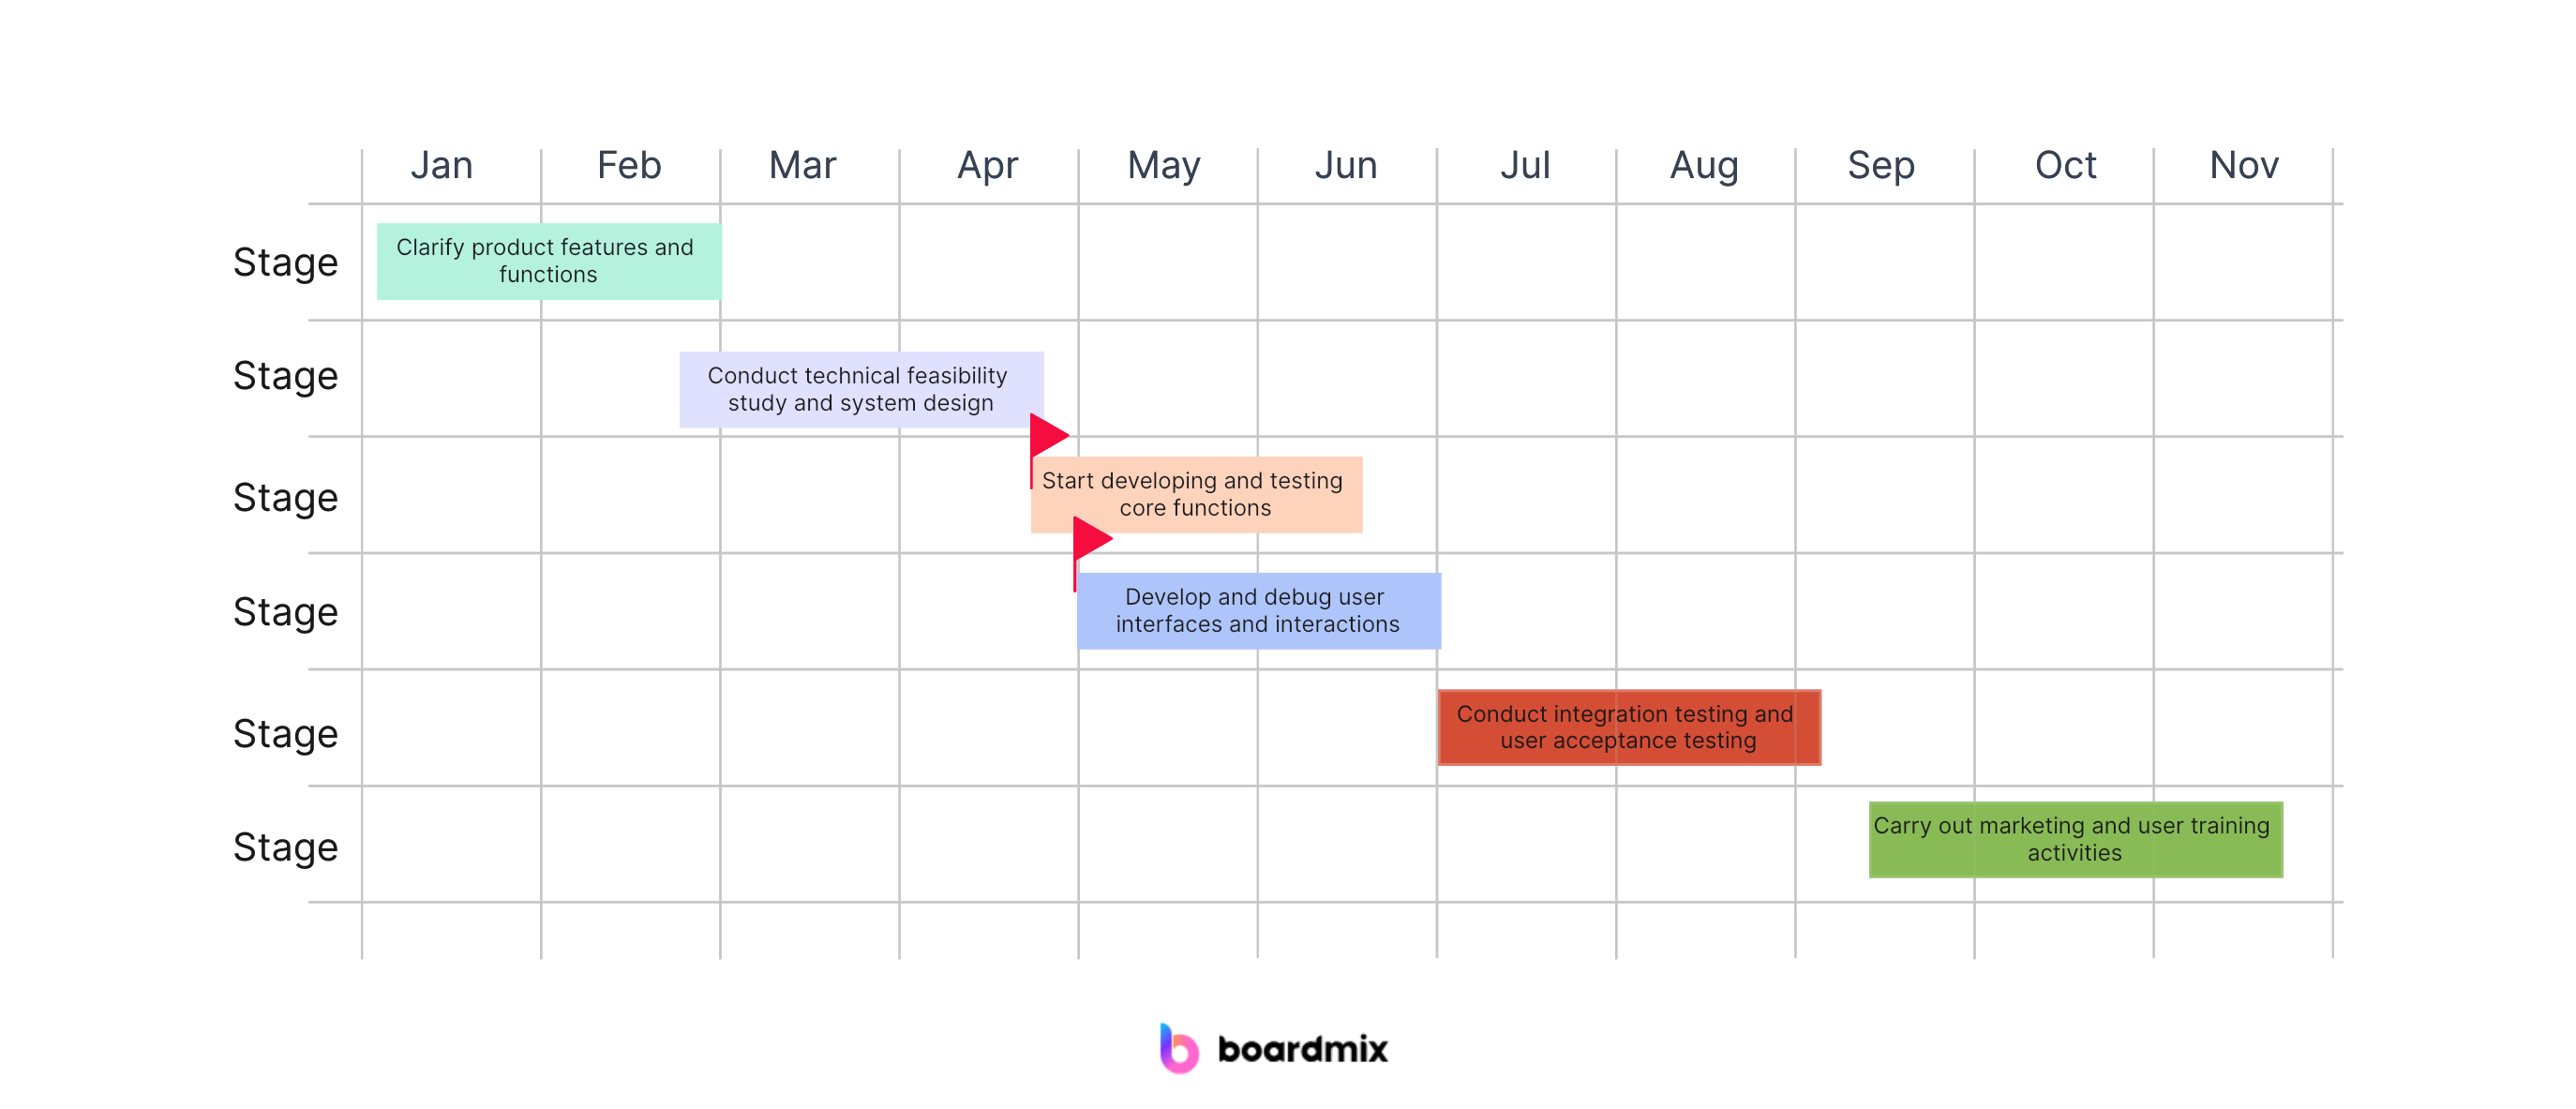 How to Improve Schedule Management in Project Management